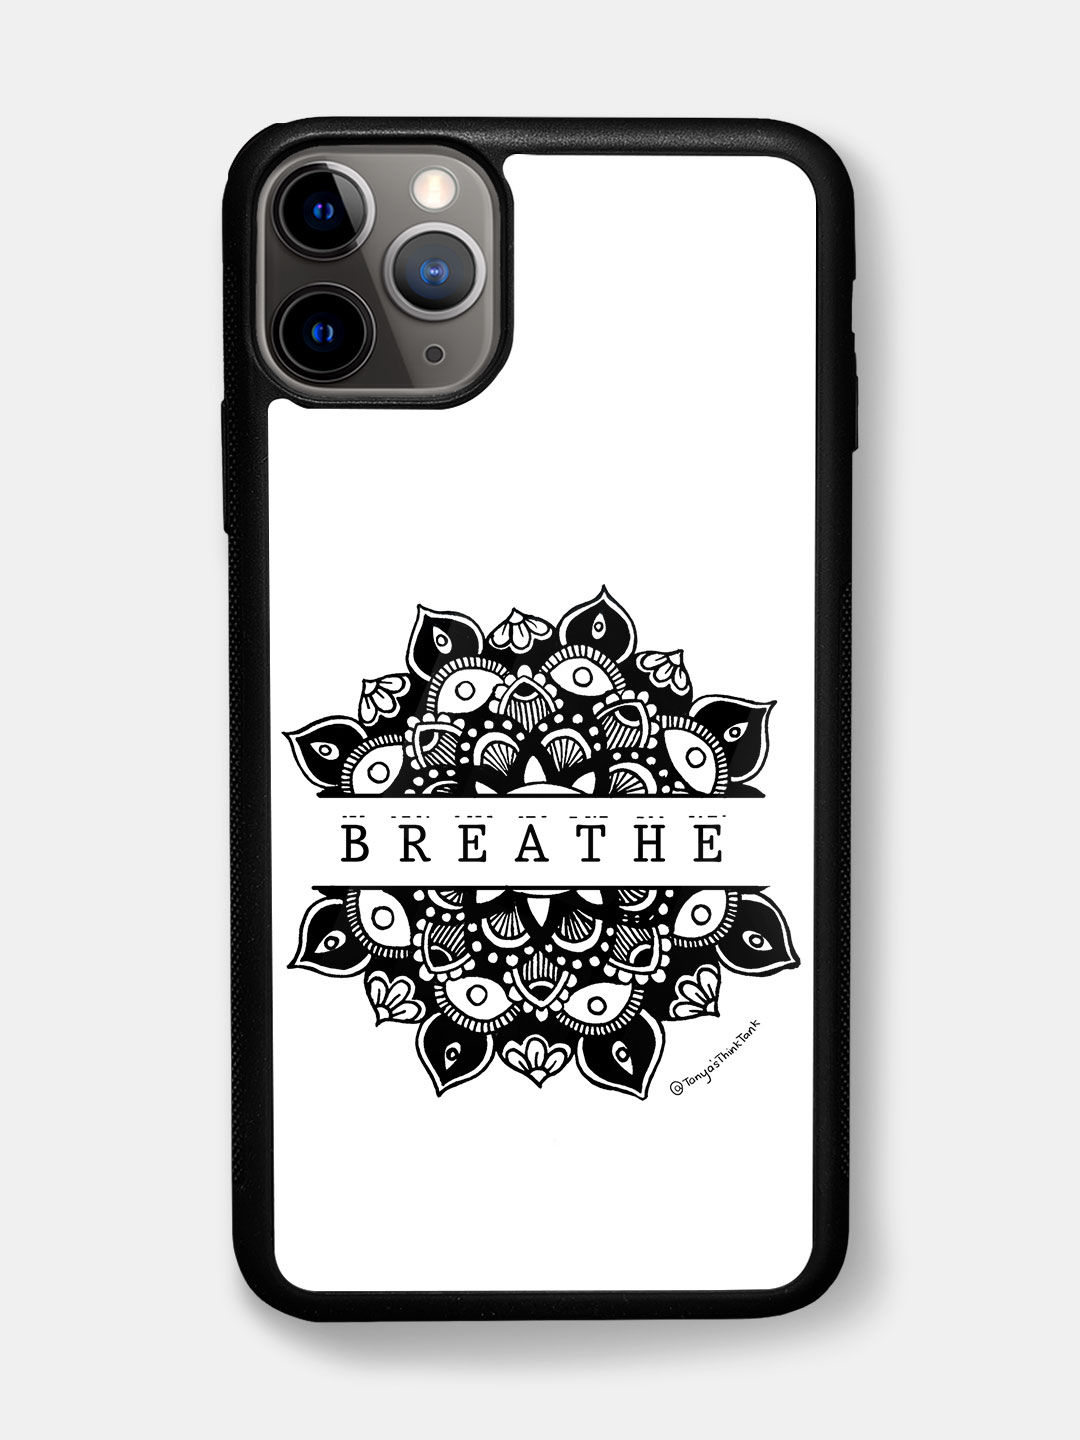 Buy Breathe - Glass Phone Case for iPhone 11 Pro Phone Cases & Covers Online